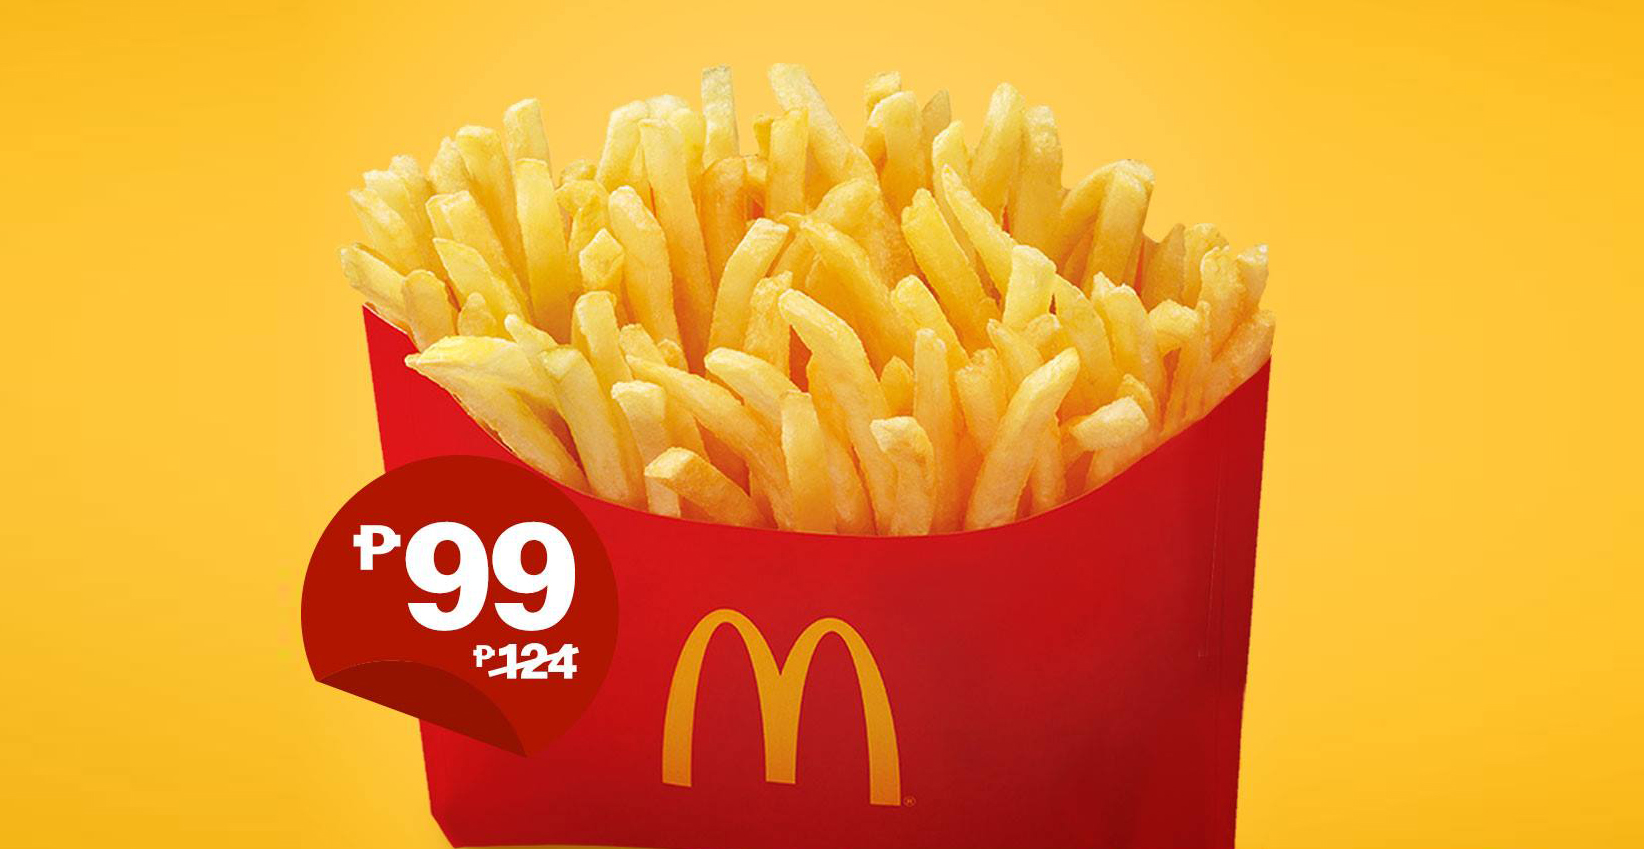 McDo BFF Fries P99 only